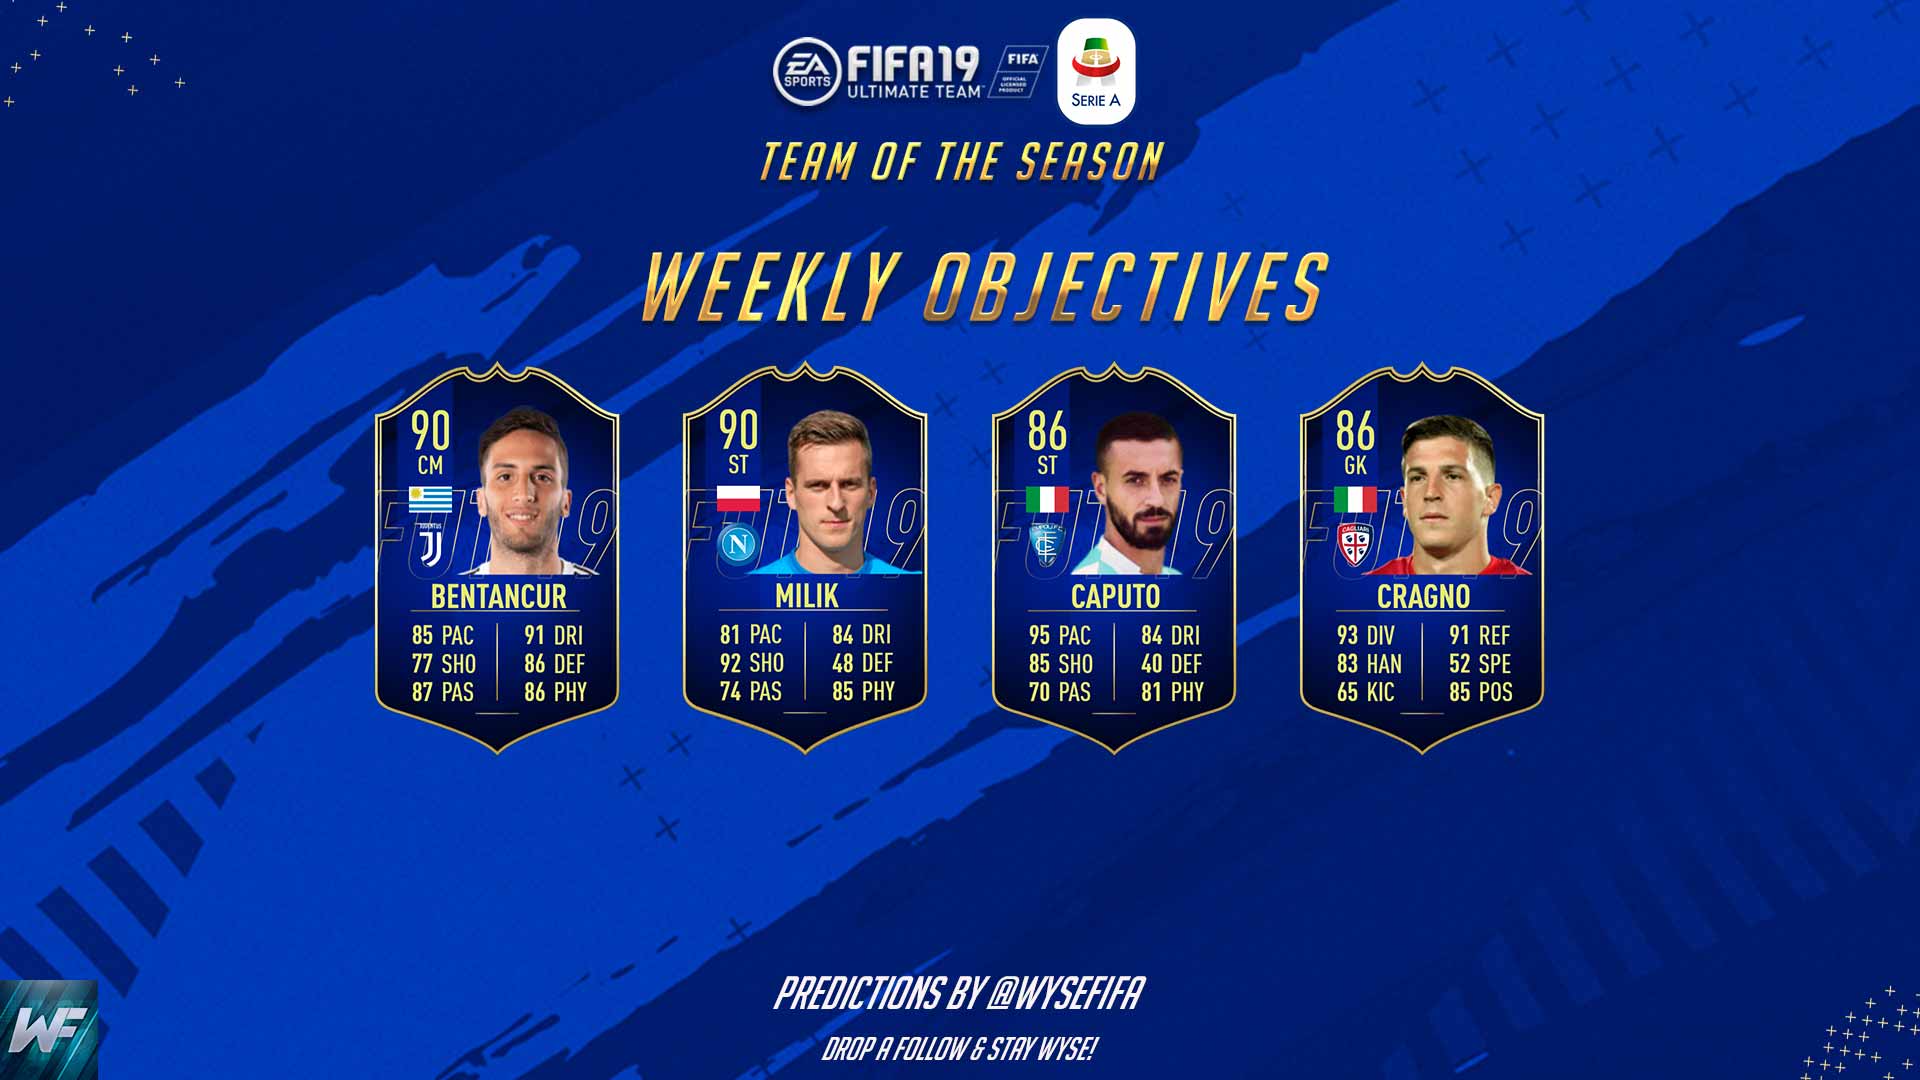 Prisoner of war Give birth Various Dexerto FC on Twitter: "#FIFA19 Serie A TOTS predictions by @WyseFIFA! 🇮🇹  Updated predictions for other leagues here: 👇 #TOTS  https://t.co/qle473Ew2B https://t.co/GHqBOIjFsZ" / Twitter